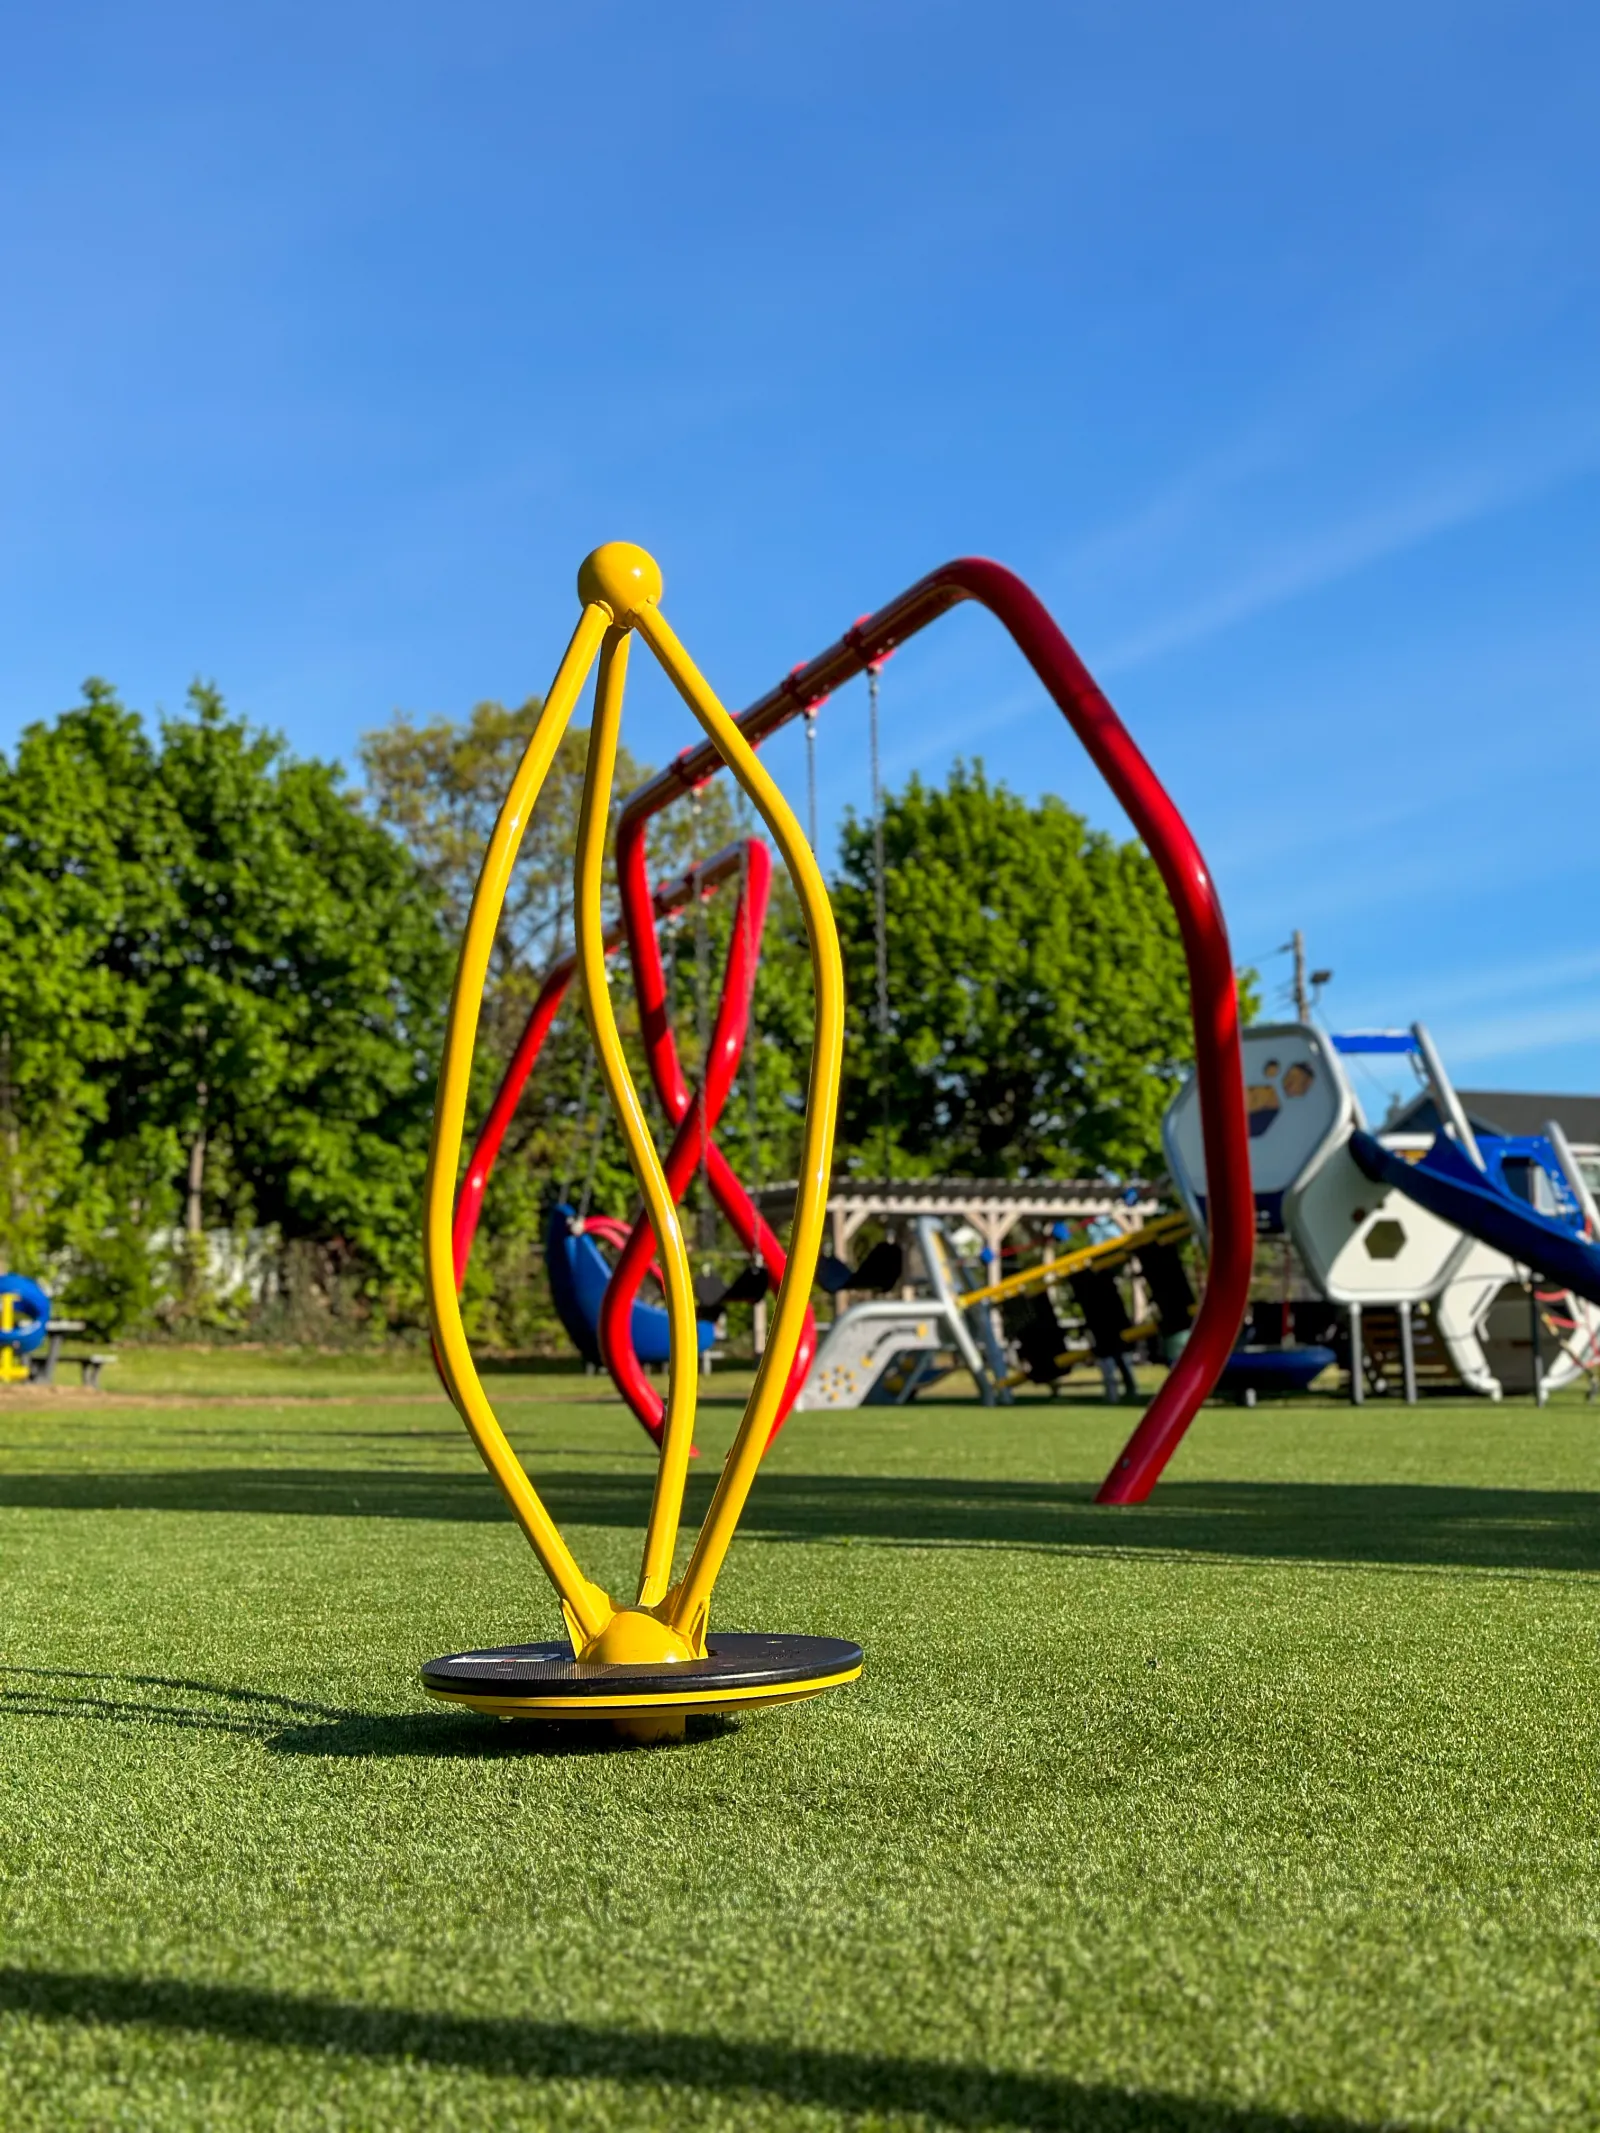 a colorful sculpture in a park